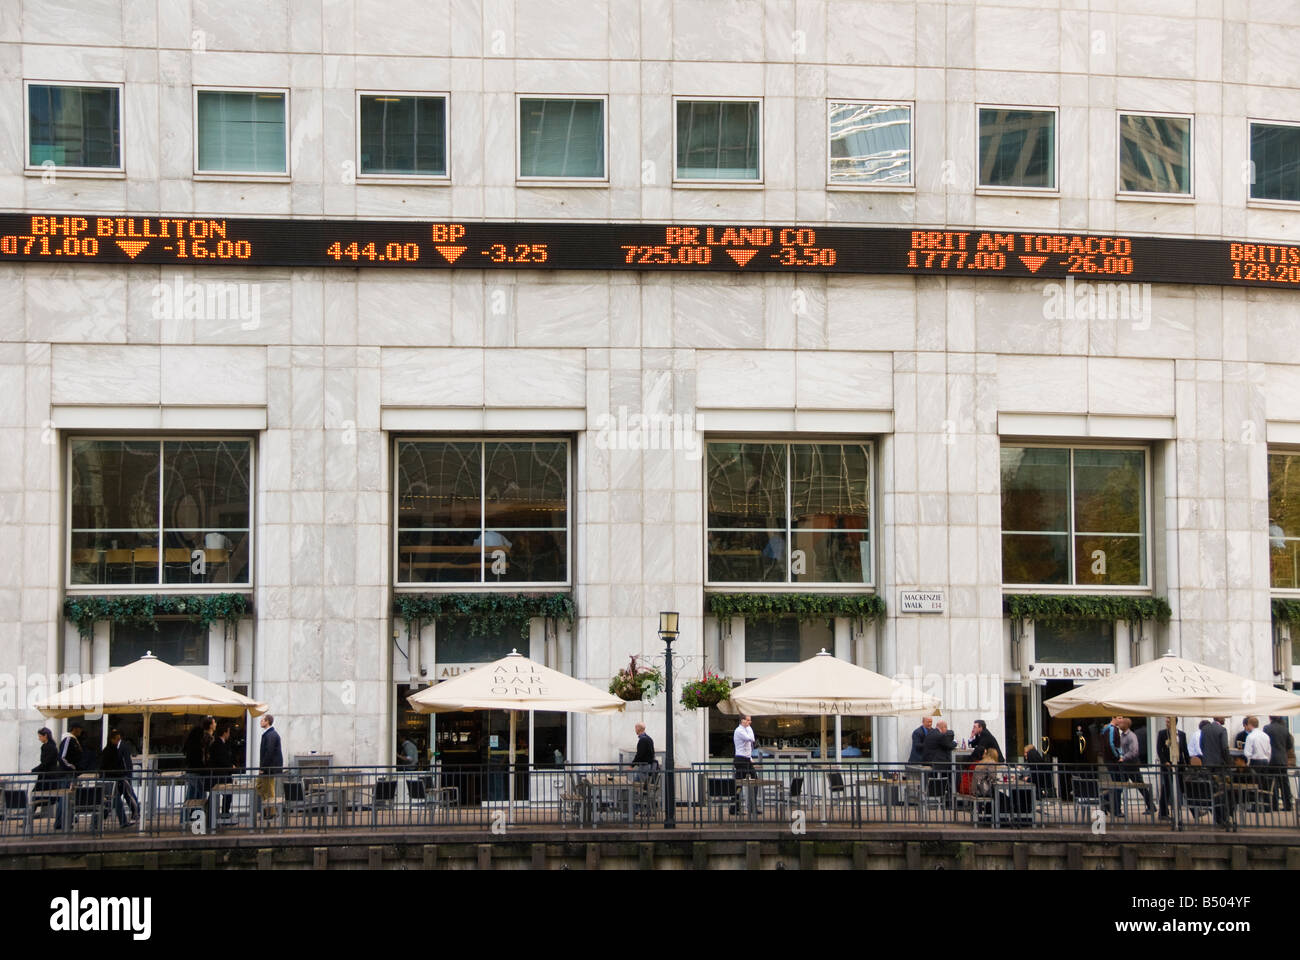 Stock prices falling on the Reuters ticker at Canary Wharf London England Stock Photo